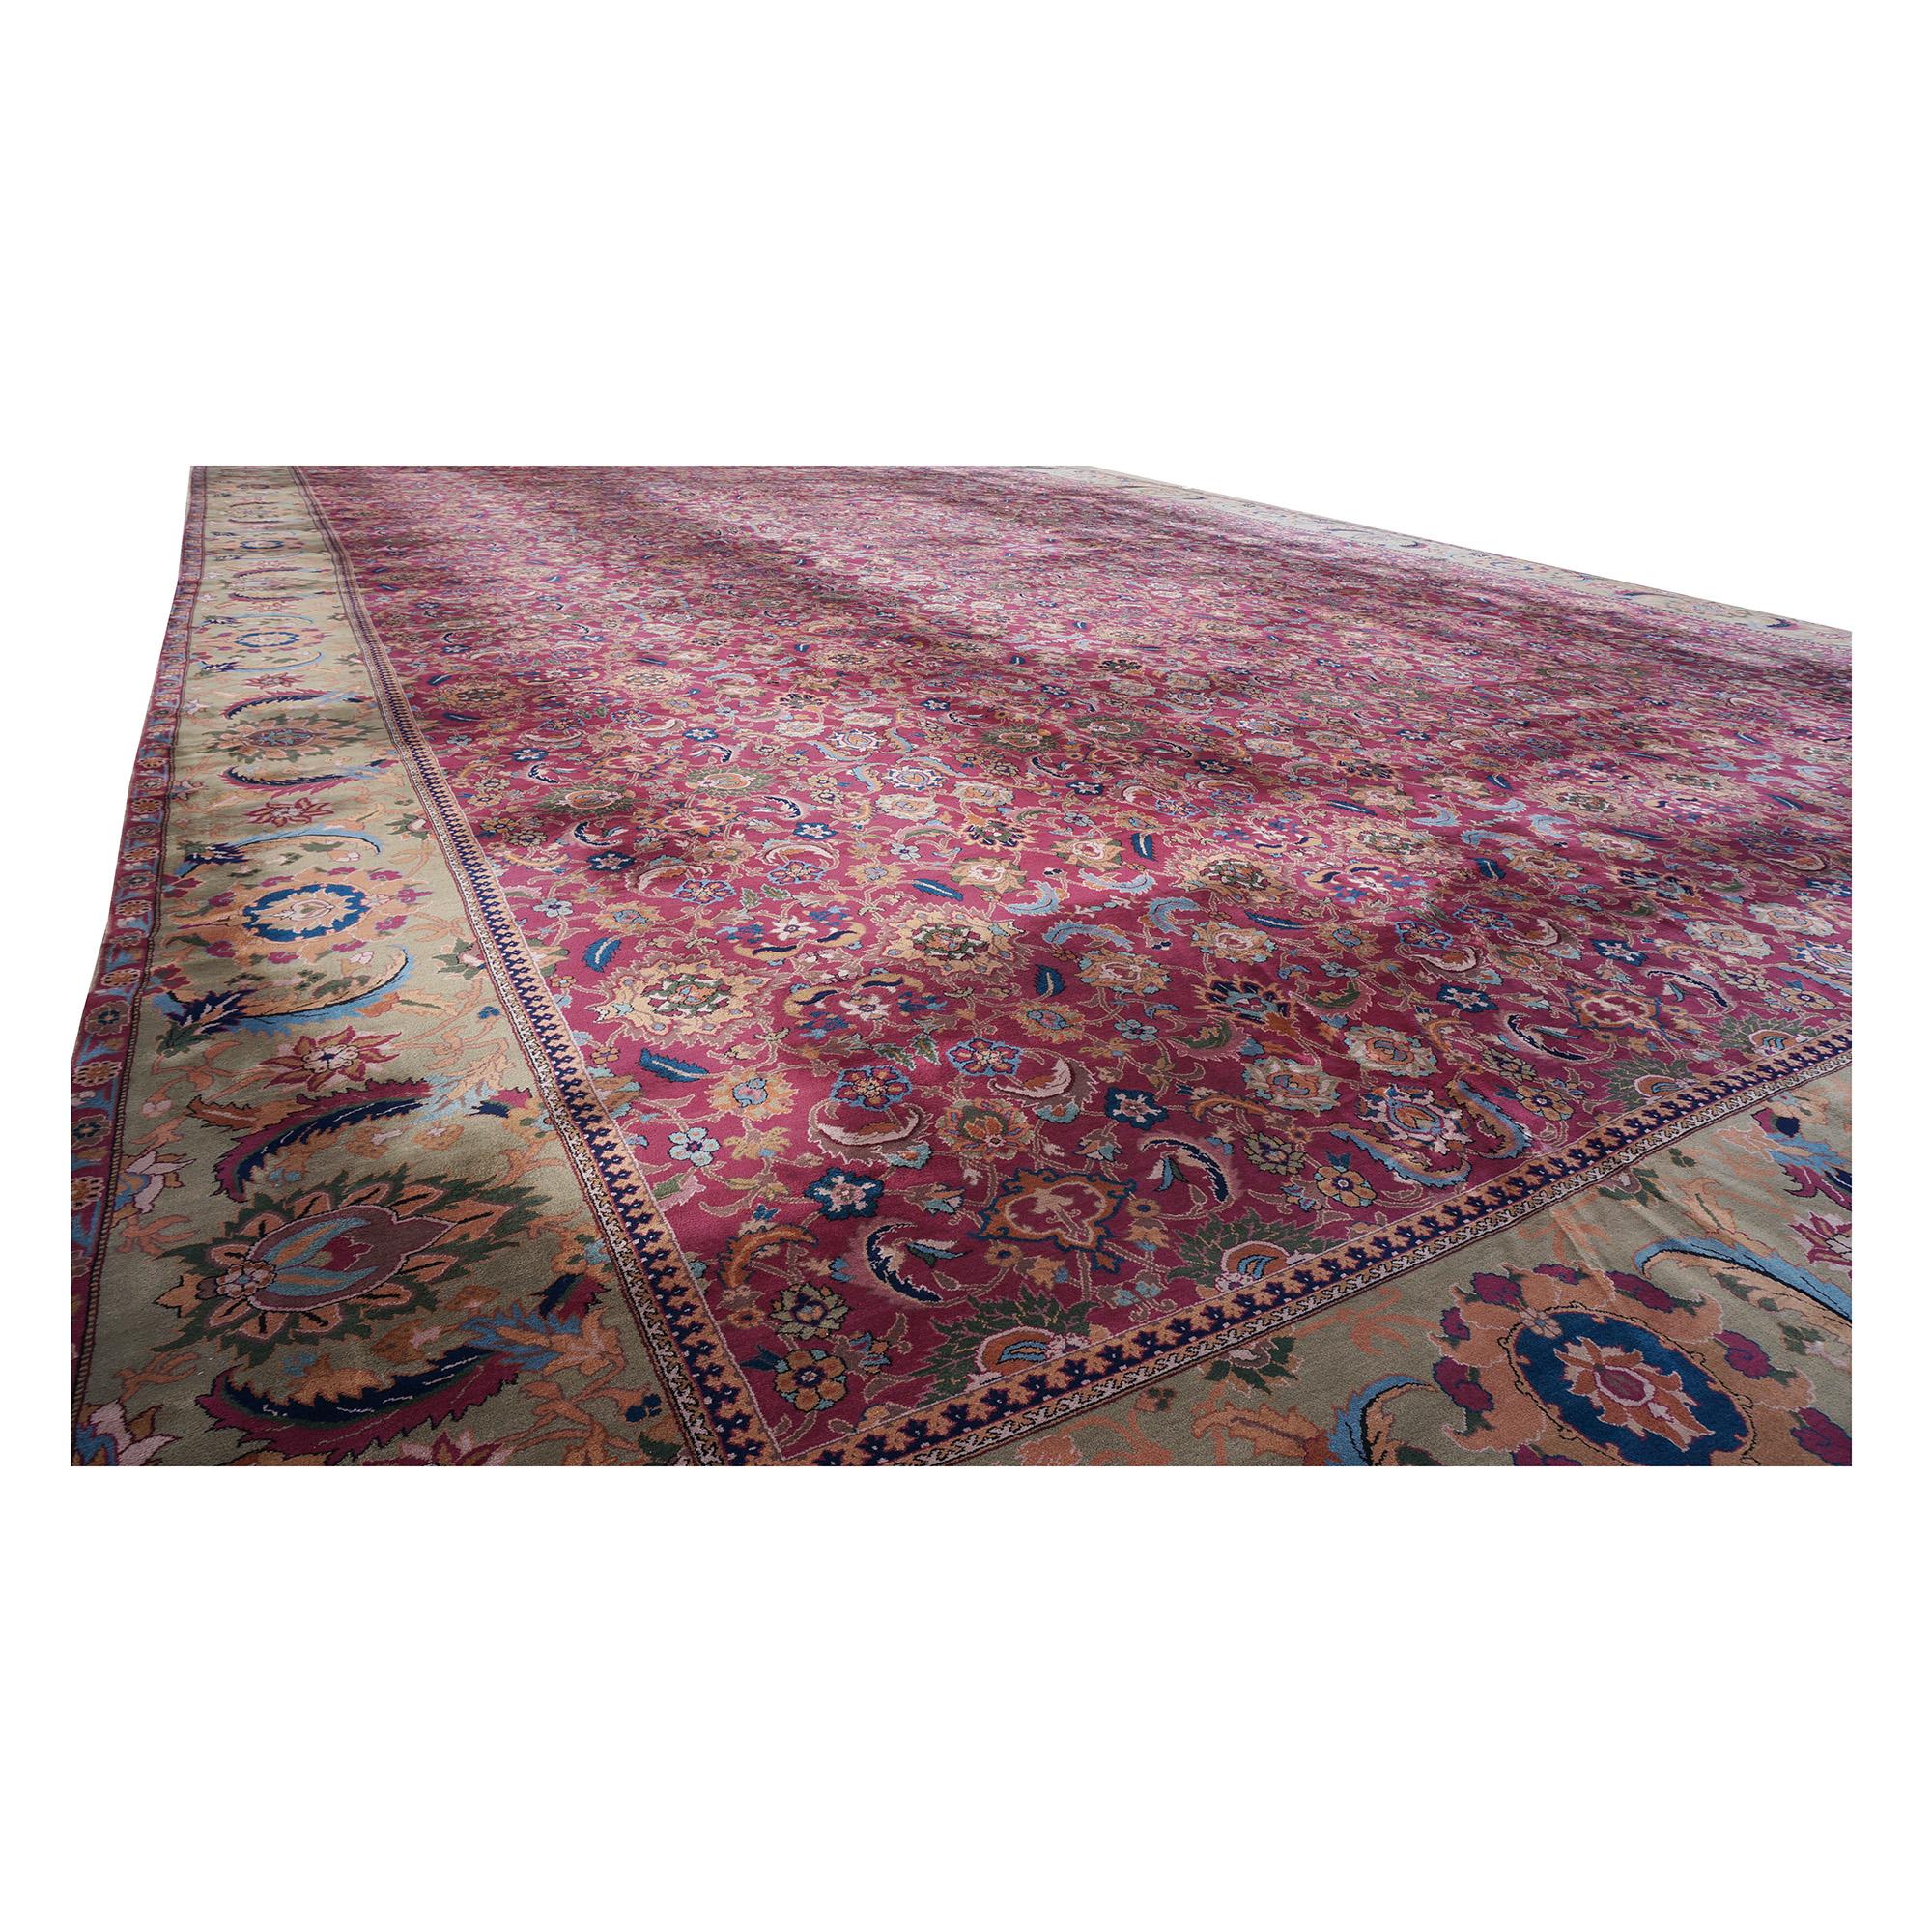 Early 20th Century 26'X42' Palace Sized Antique Laristan Wool Handmade Rug In Good Condition For Sale In Houston, TX